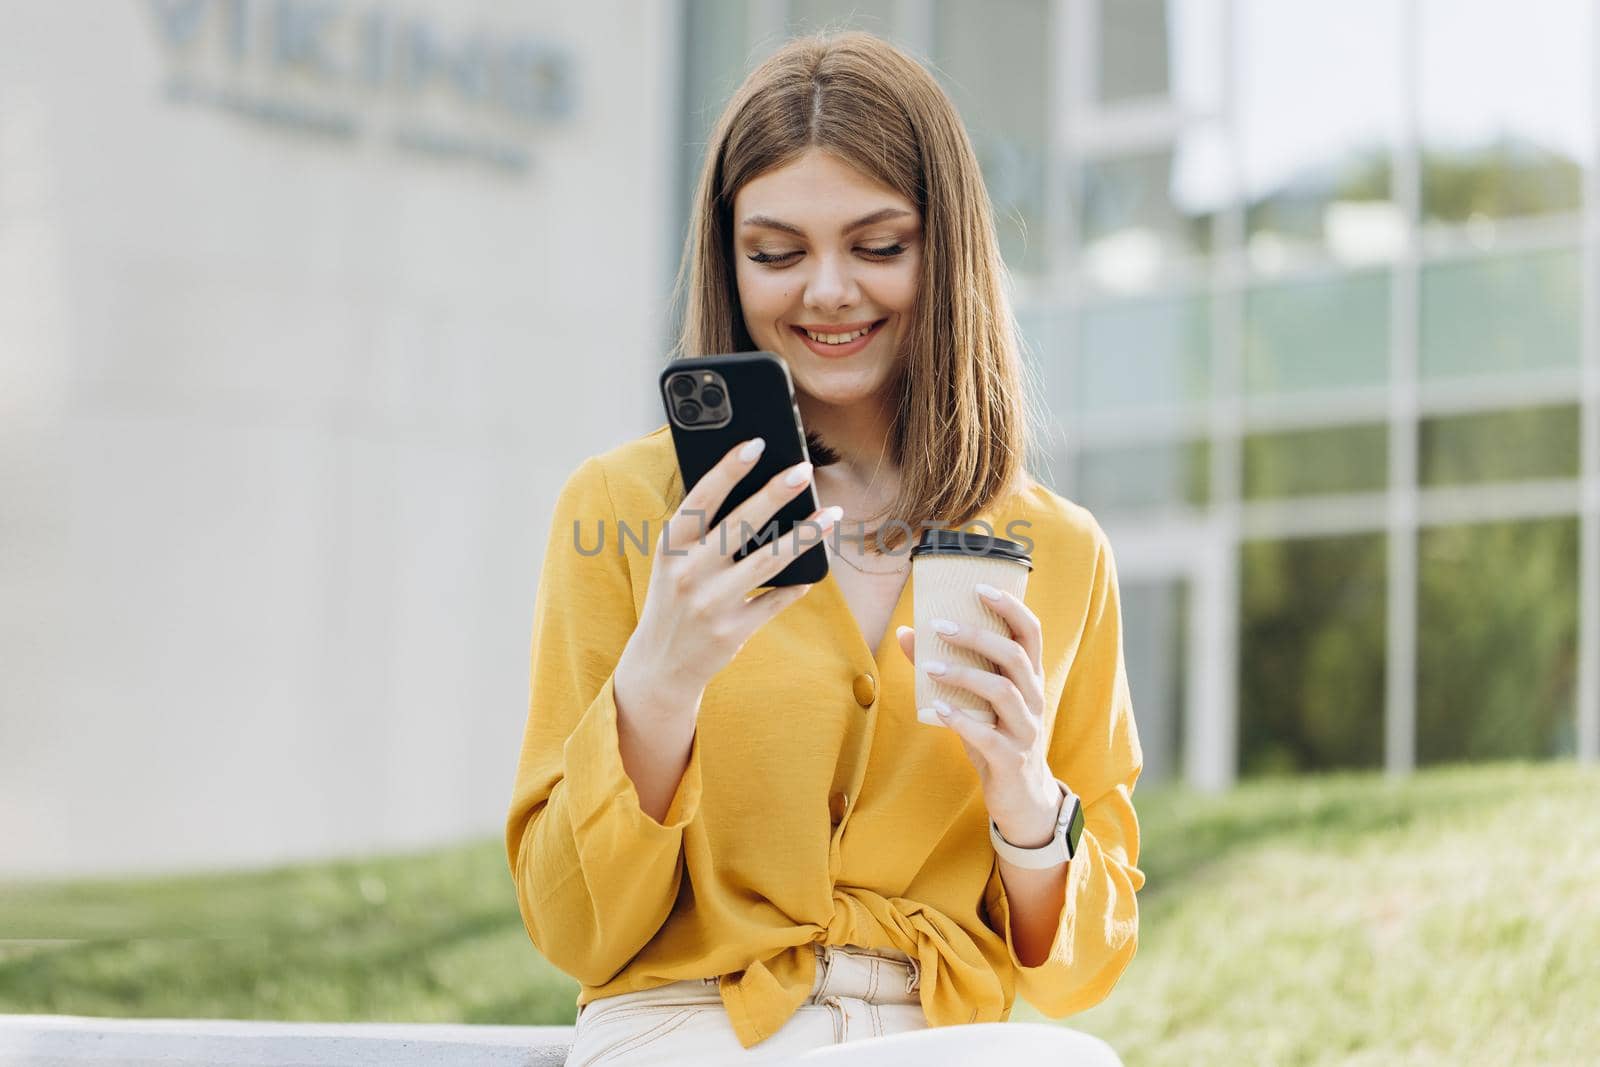 Appealing young elegant caucasian woman using social media application on smartphone text messages receive news smiling outdoor. People portraits and technology concept.